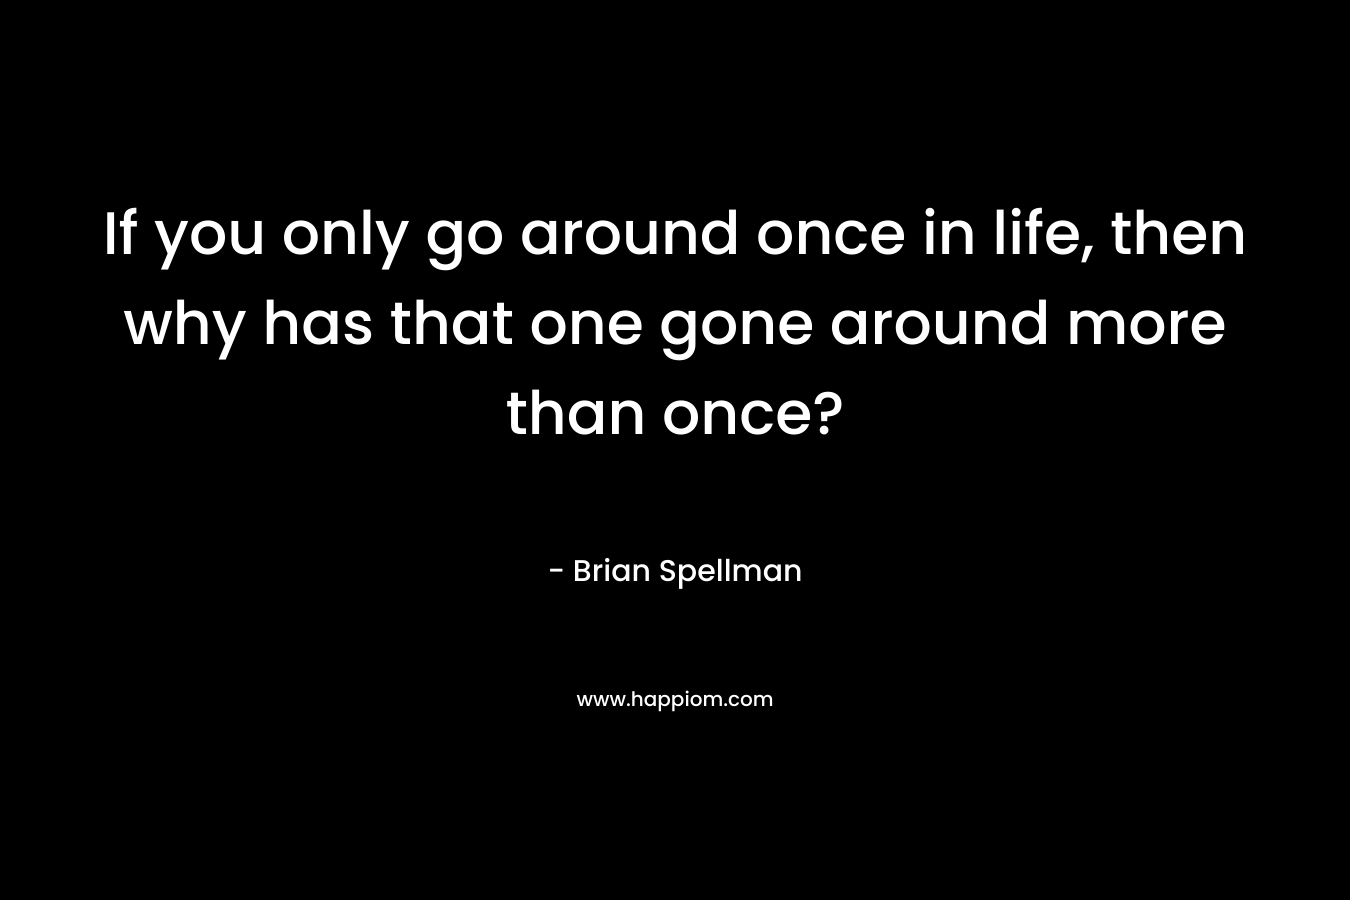 If you only go around once in life, then why has that one gone around more than once?